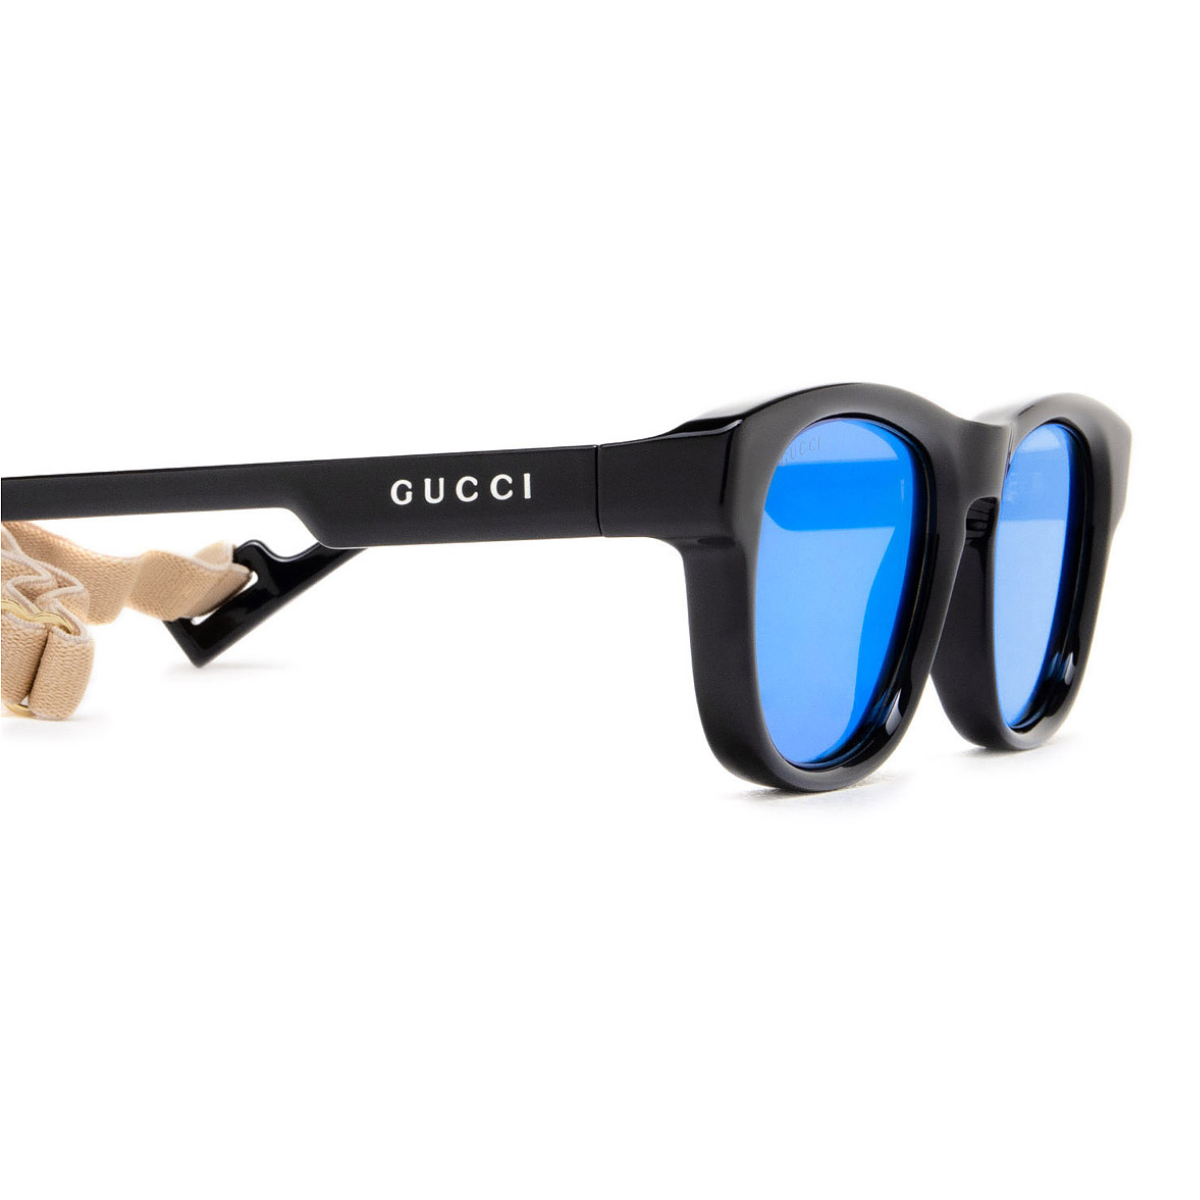 Gucci 1238S Sunglasses: Iconic Elegance and UV Protection